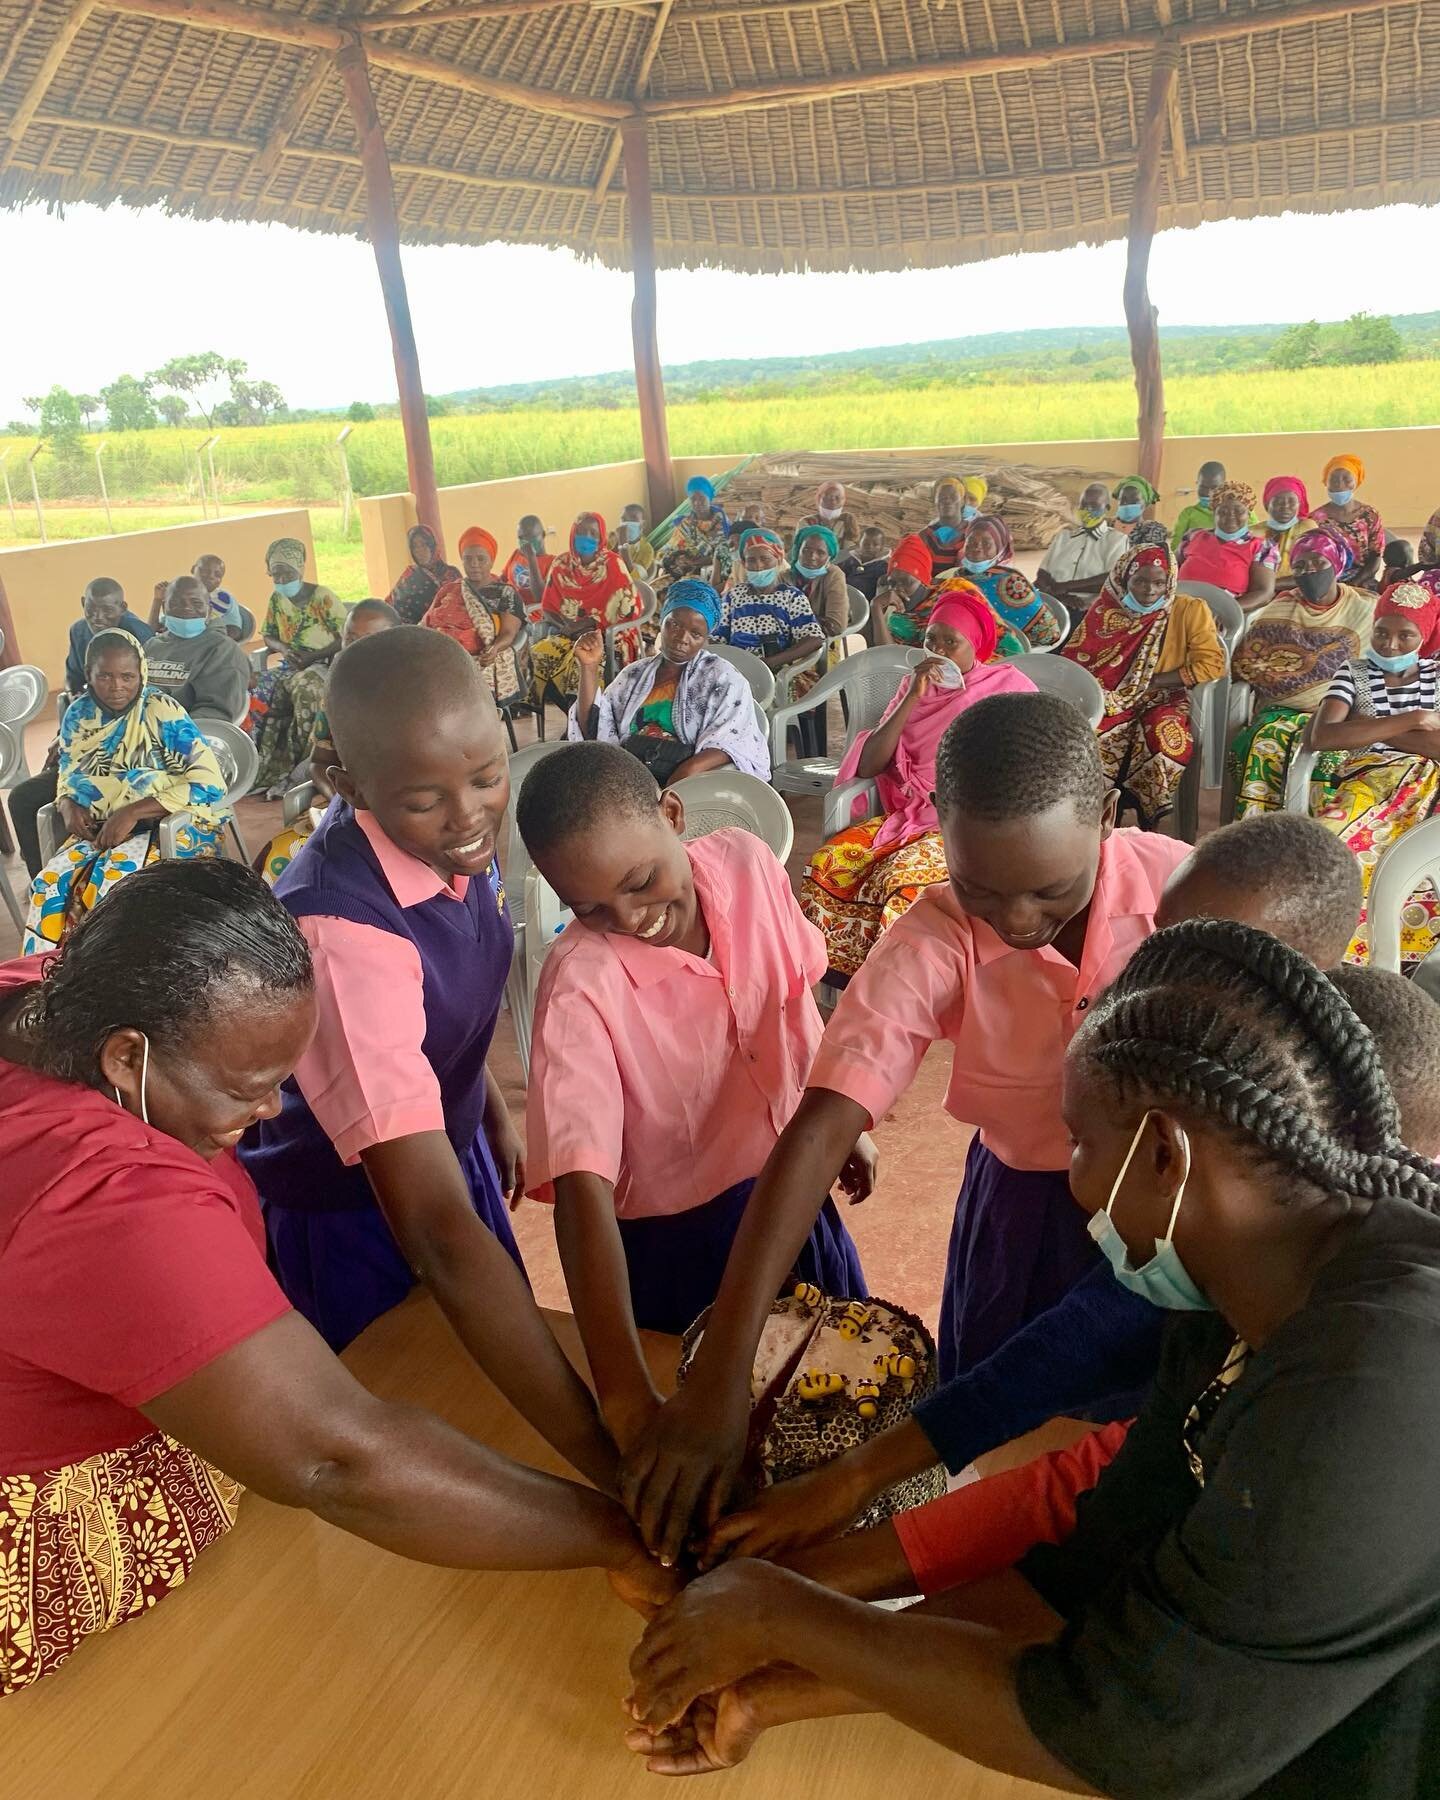 The Fire has been lit!  Our Mommas are not waiting and hoping for their daughters to get one of those prized school scholarship, BUT stepped into the role as a business owner to SECURE she has funds to fulfill her daughter&rsquo;s education. 

Mommas